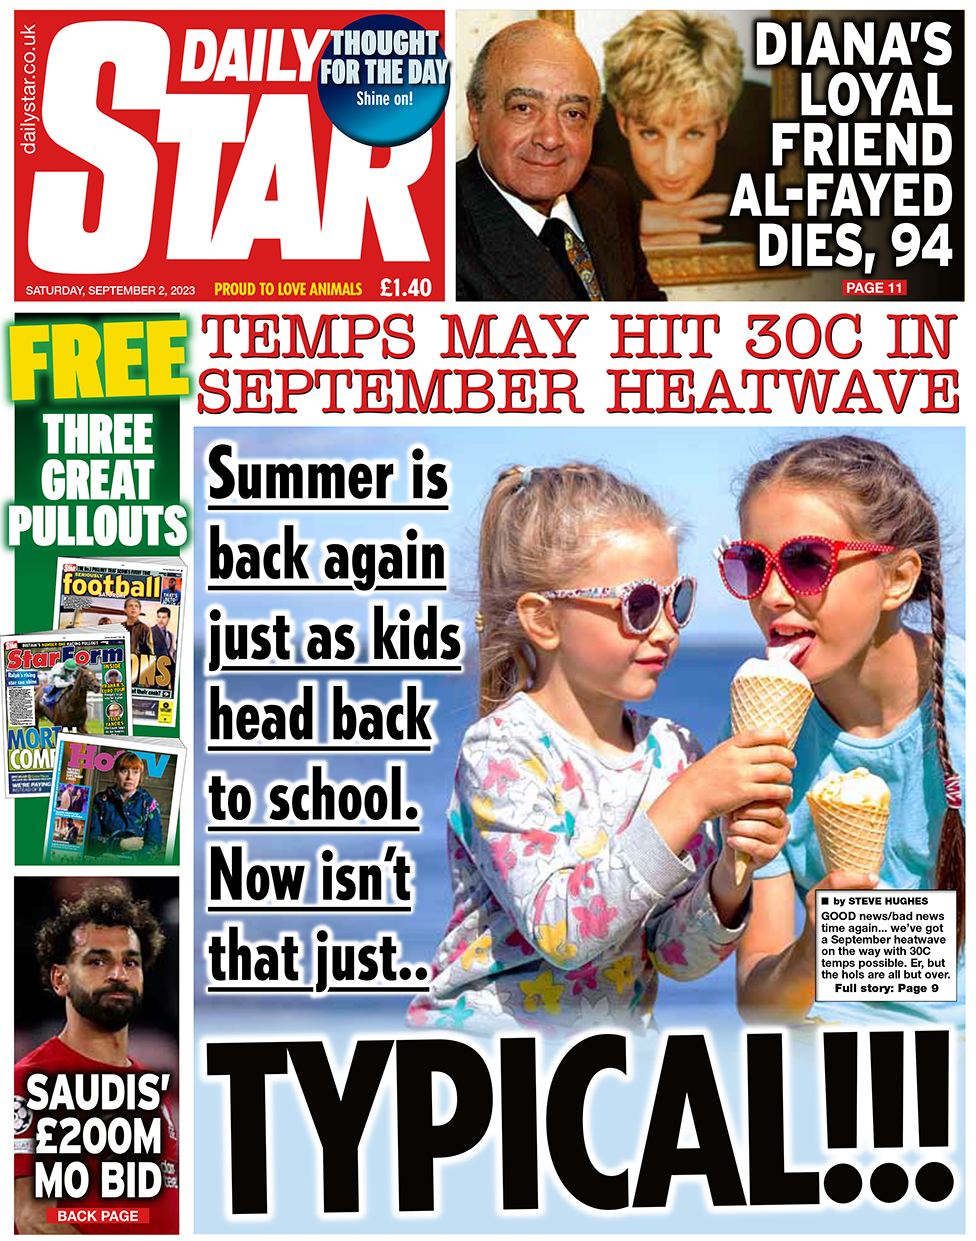 The front page of the Daily Star